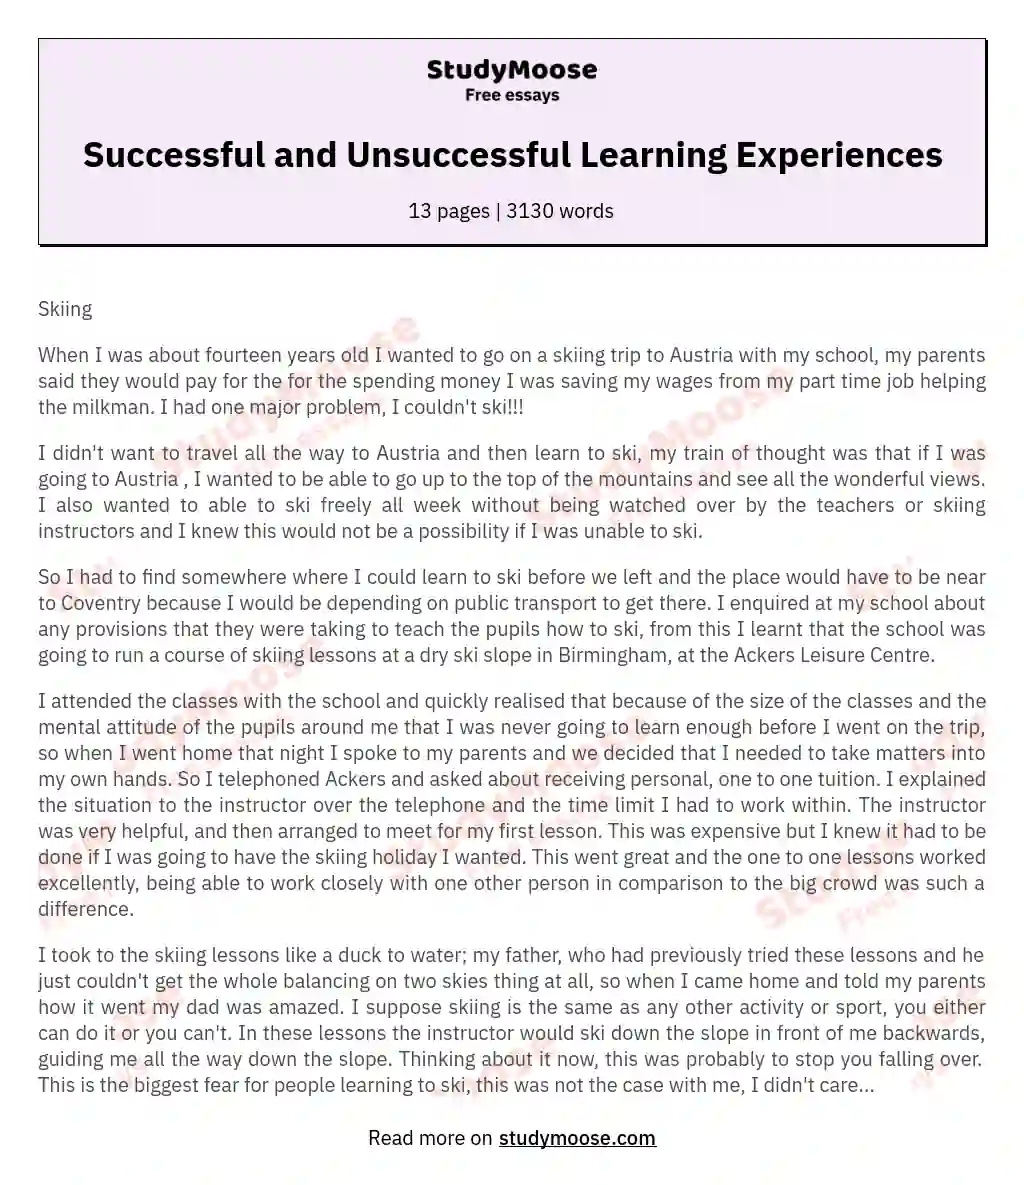 Successful and Unsuccessful Learning Experiences